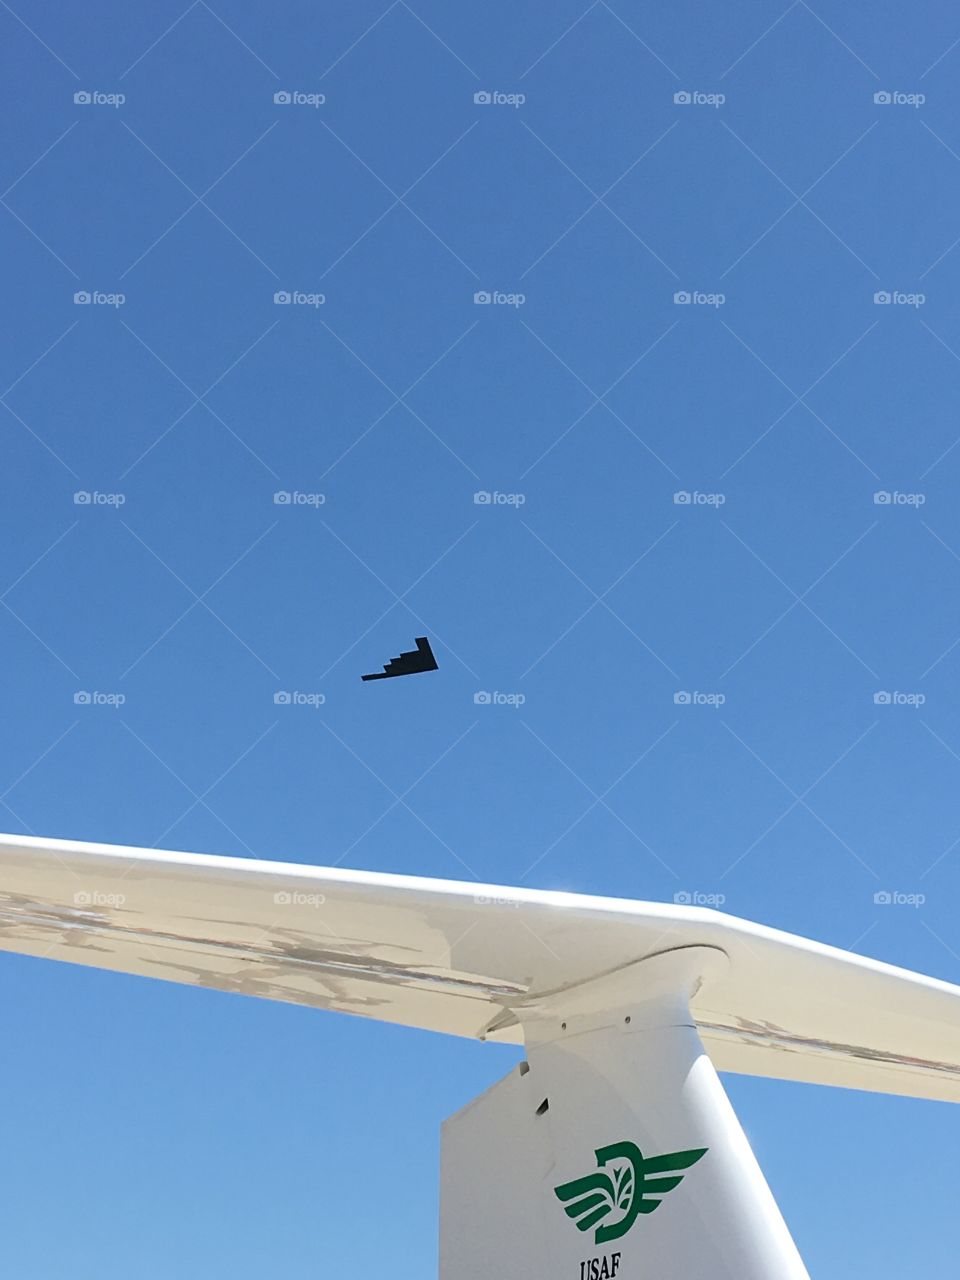 B2 above the tail of a small trainer plane